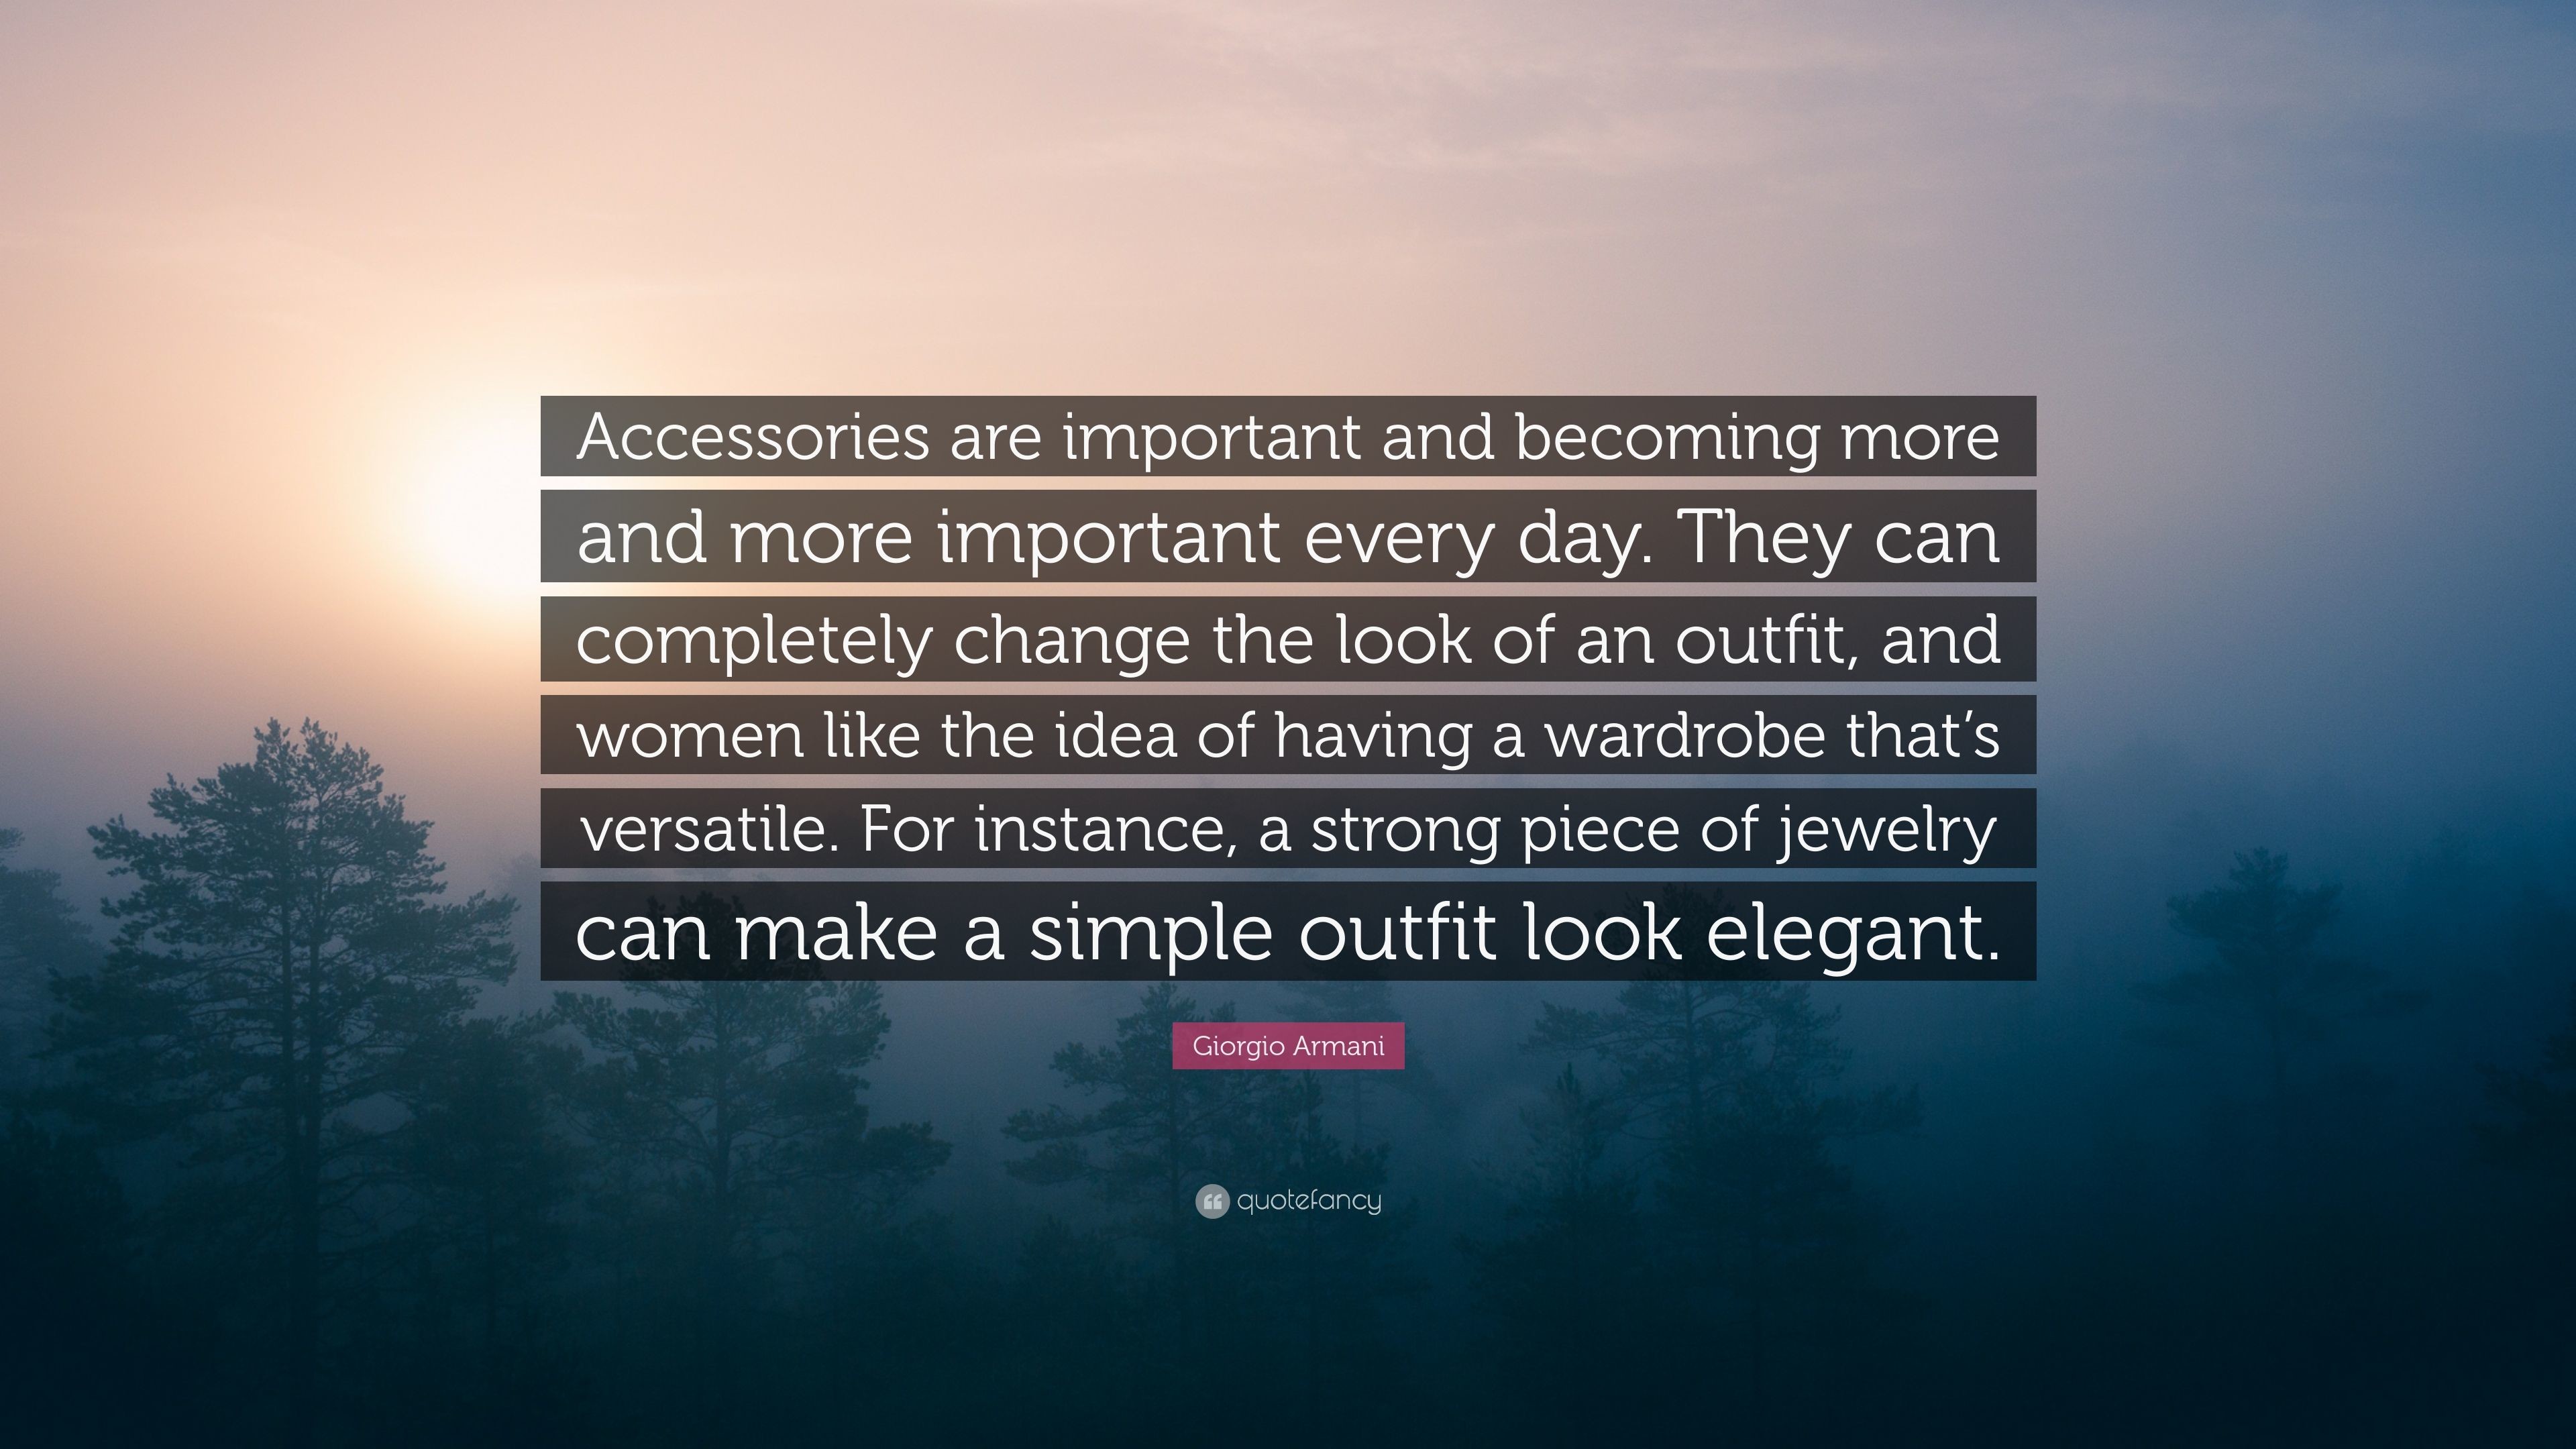 3840x2160 Giorgio Armani Quote: “Accessories are important and becoming more and more  important every day